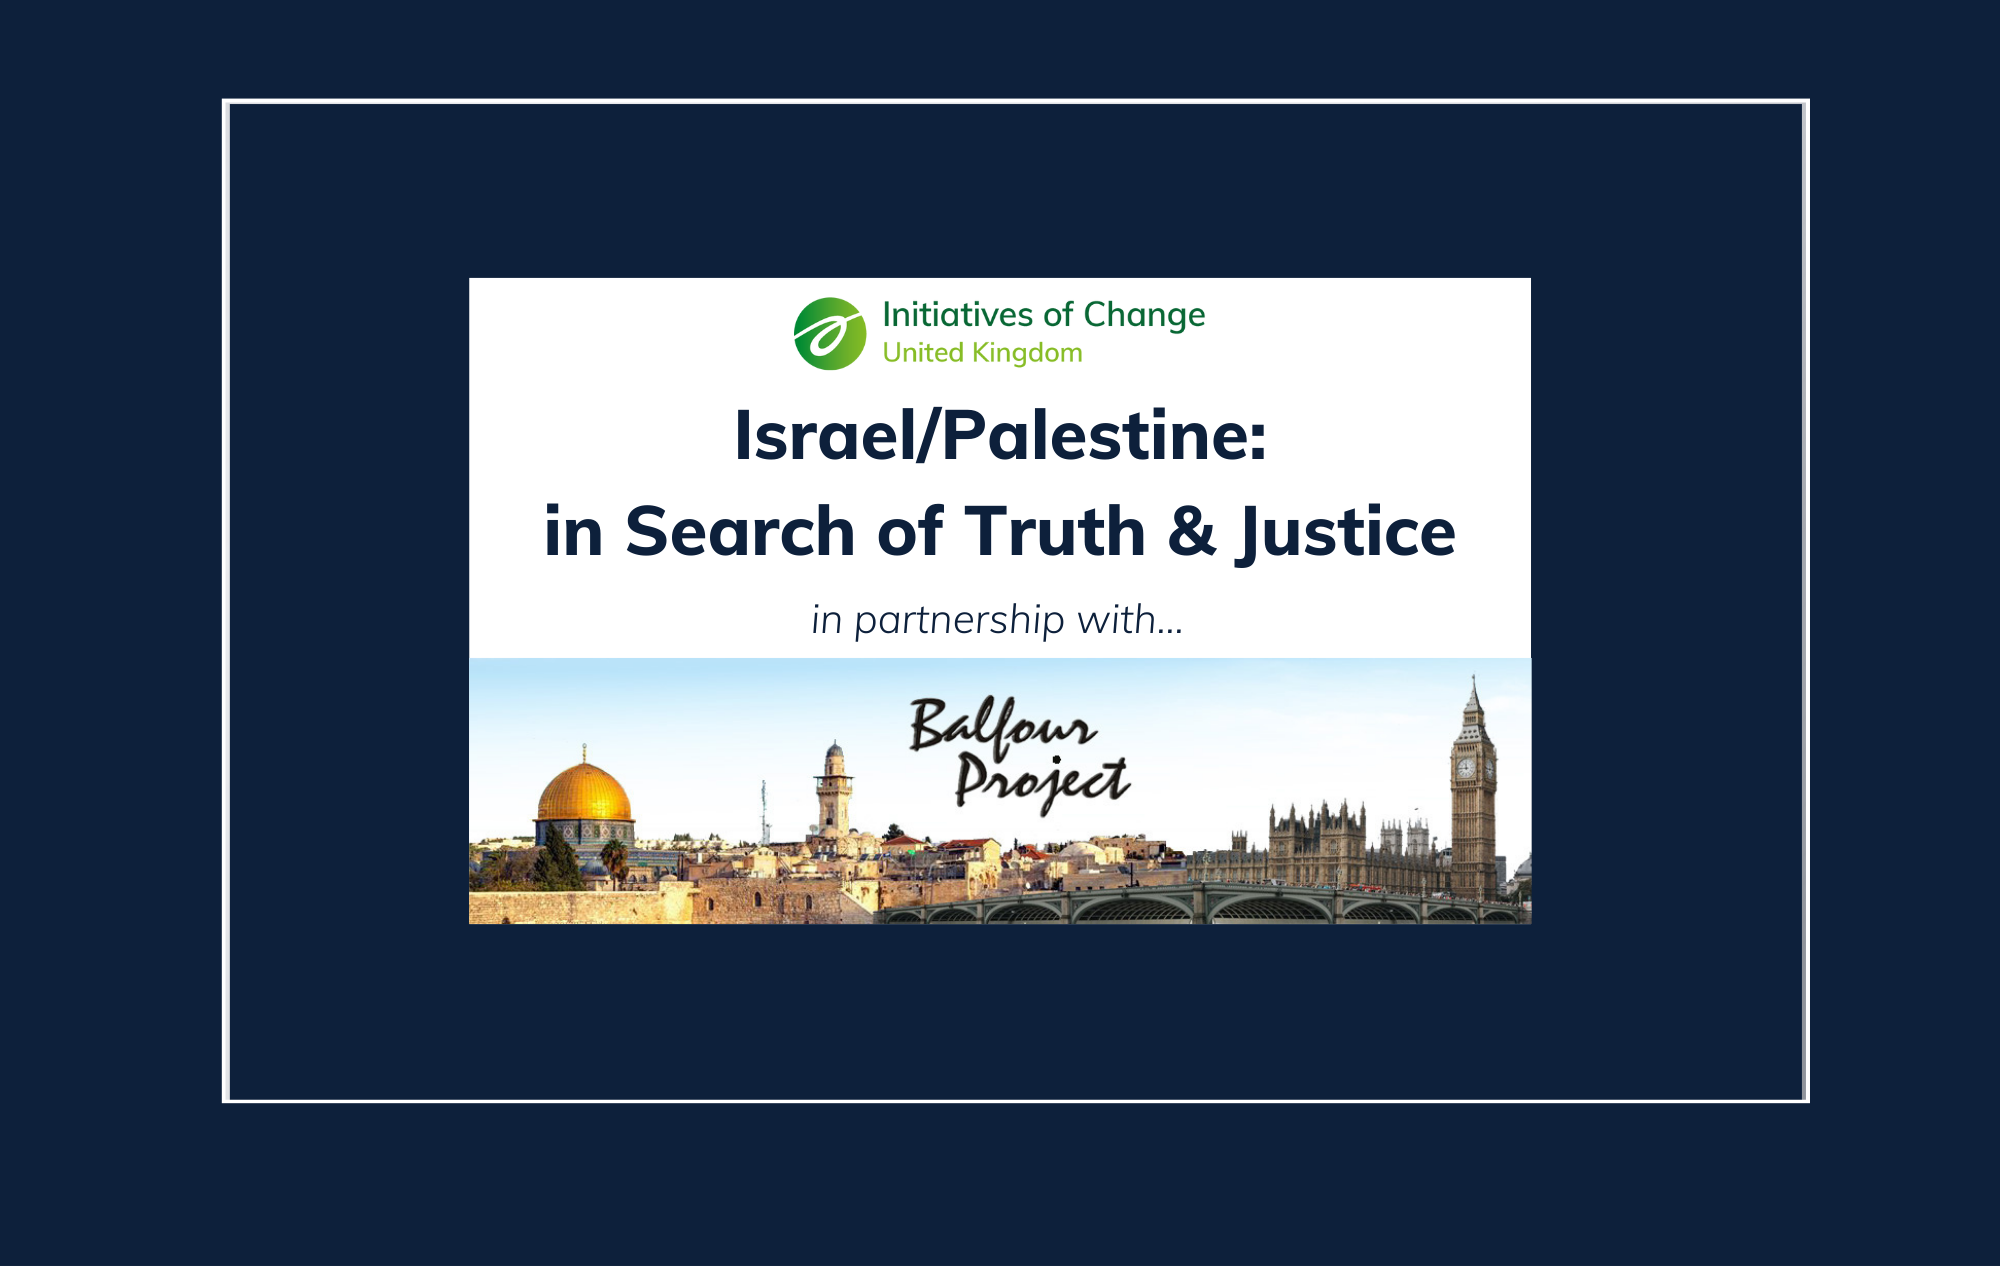 Israel/Palestine: in Search of Truth & Justice